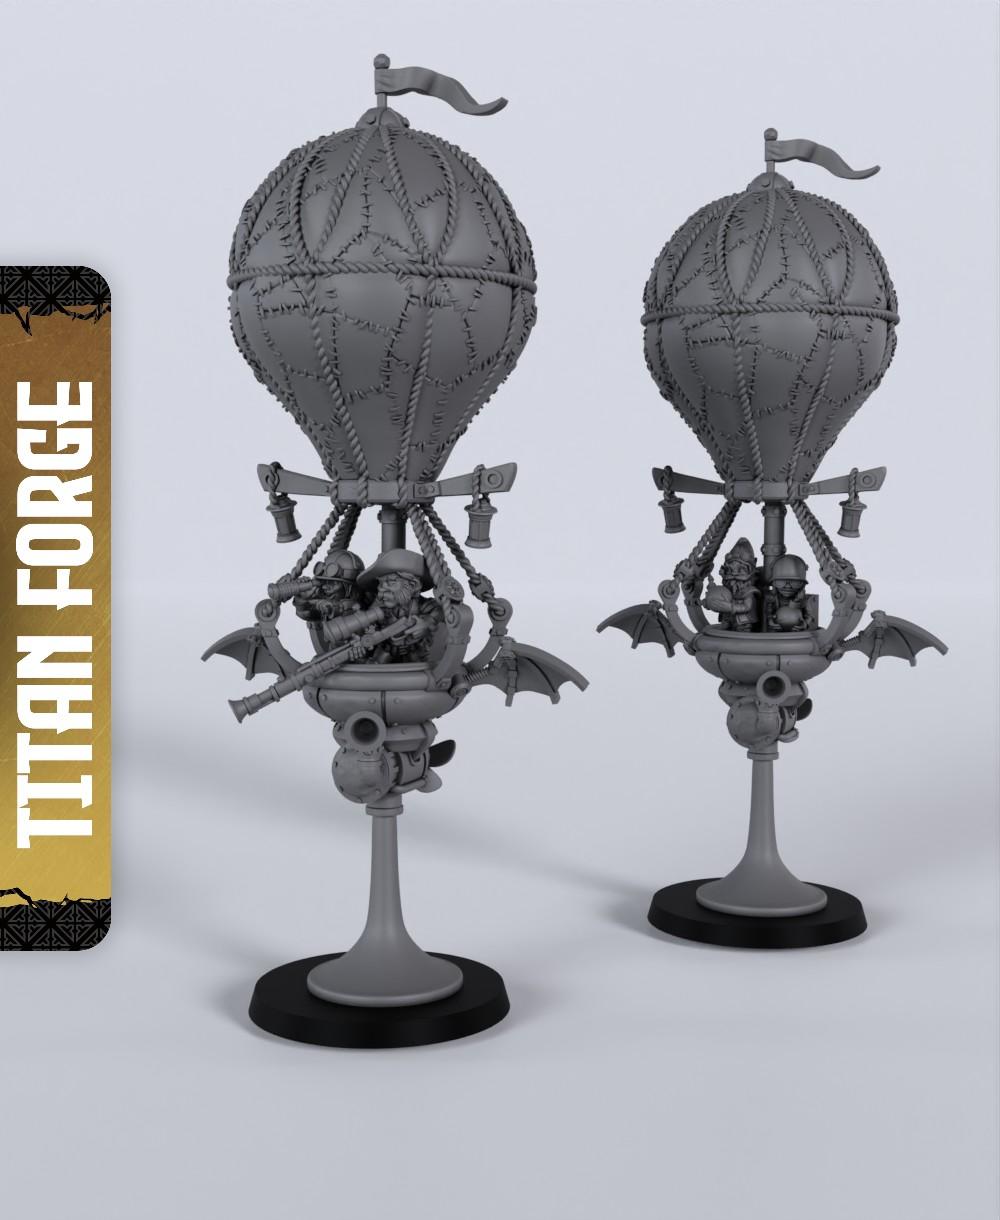 Goblin Baloons - With Free Dragon Warhammer - 5e DnD Inspired for RPG and Wargamers 3d model